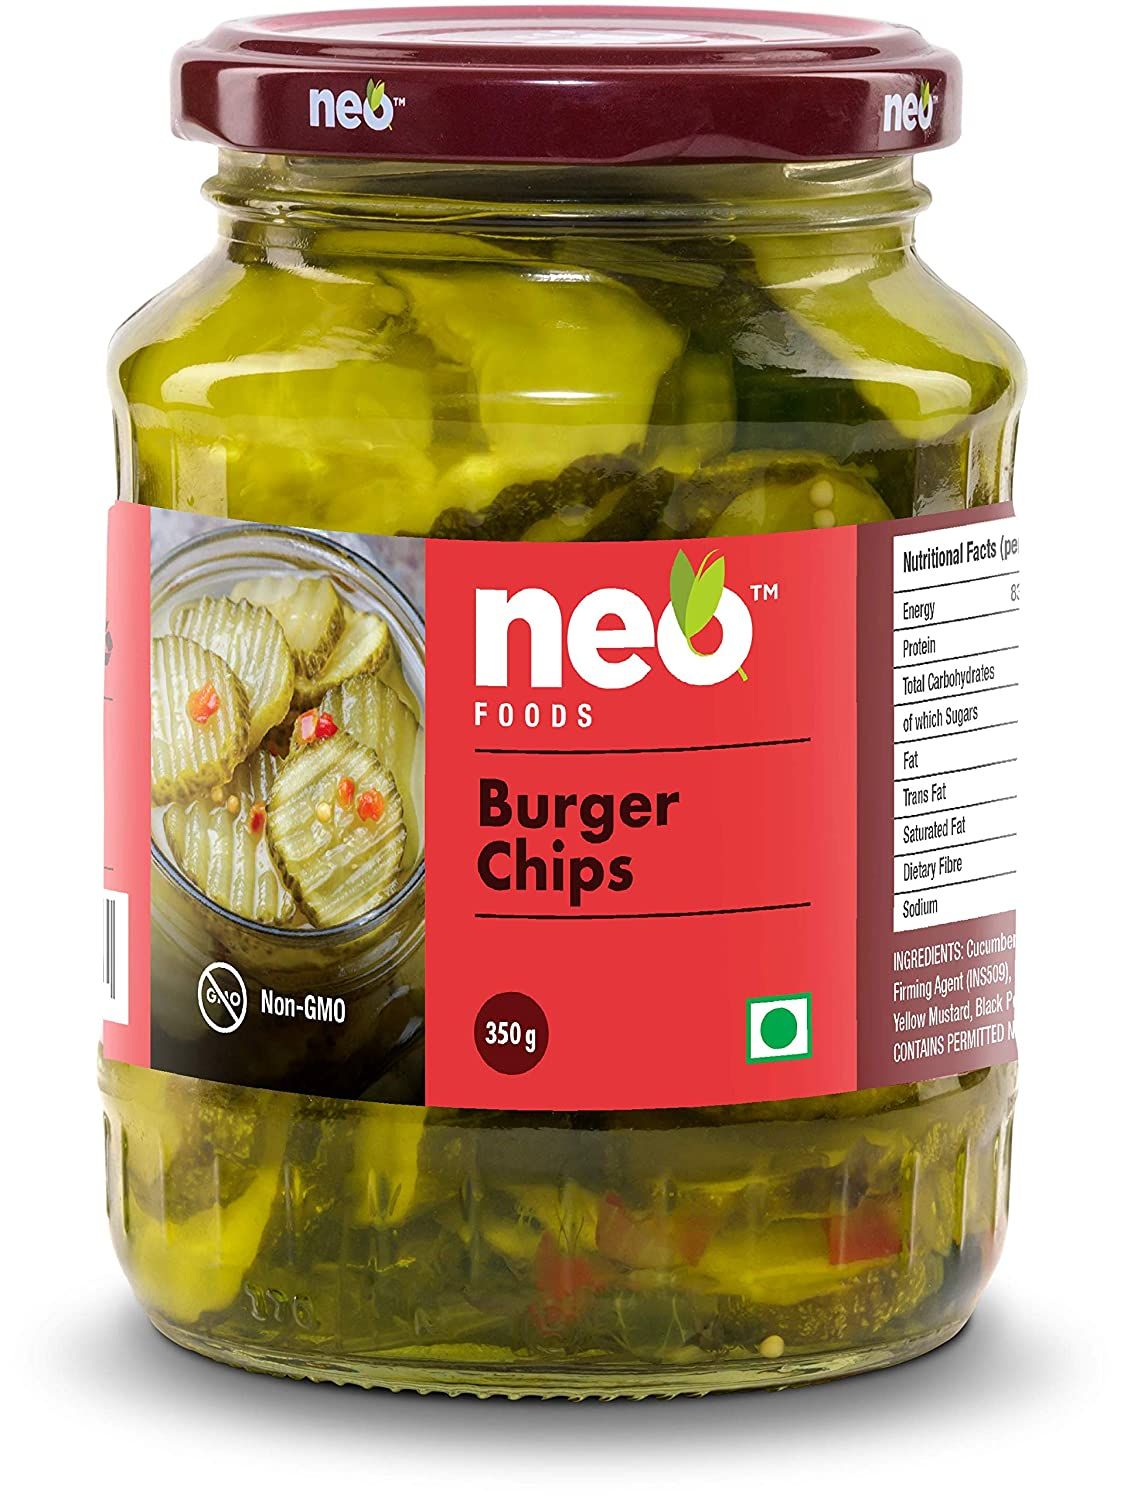 Neo Foods Burger Chips Image